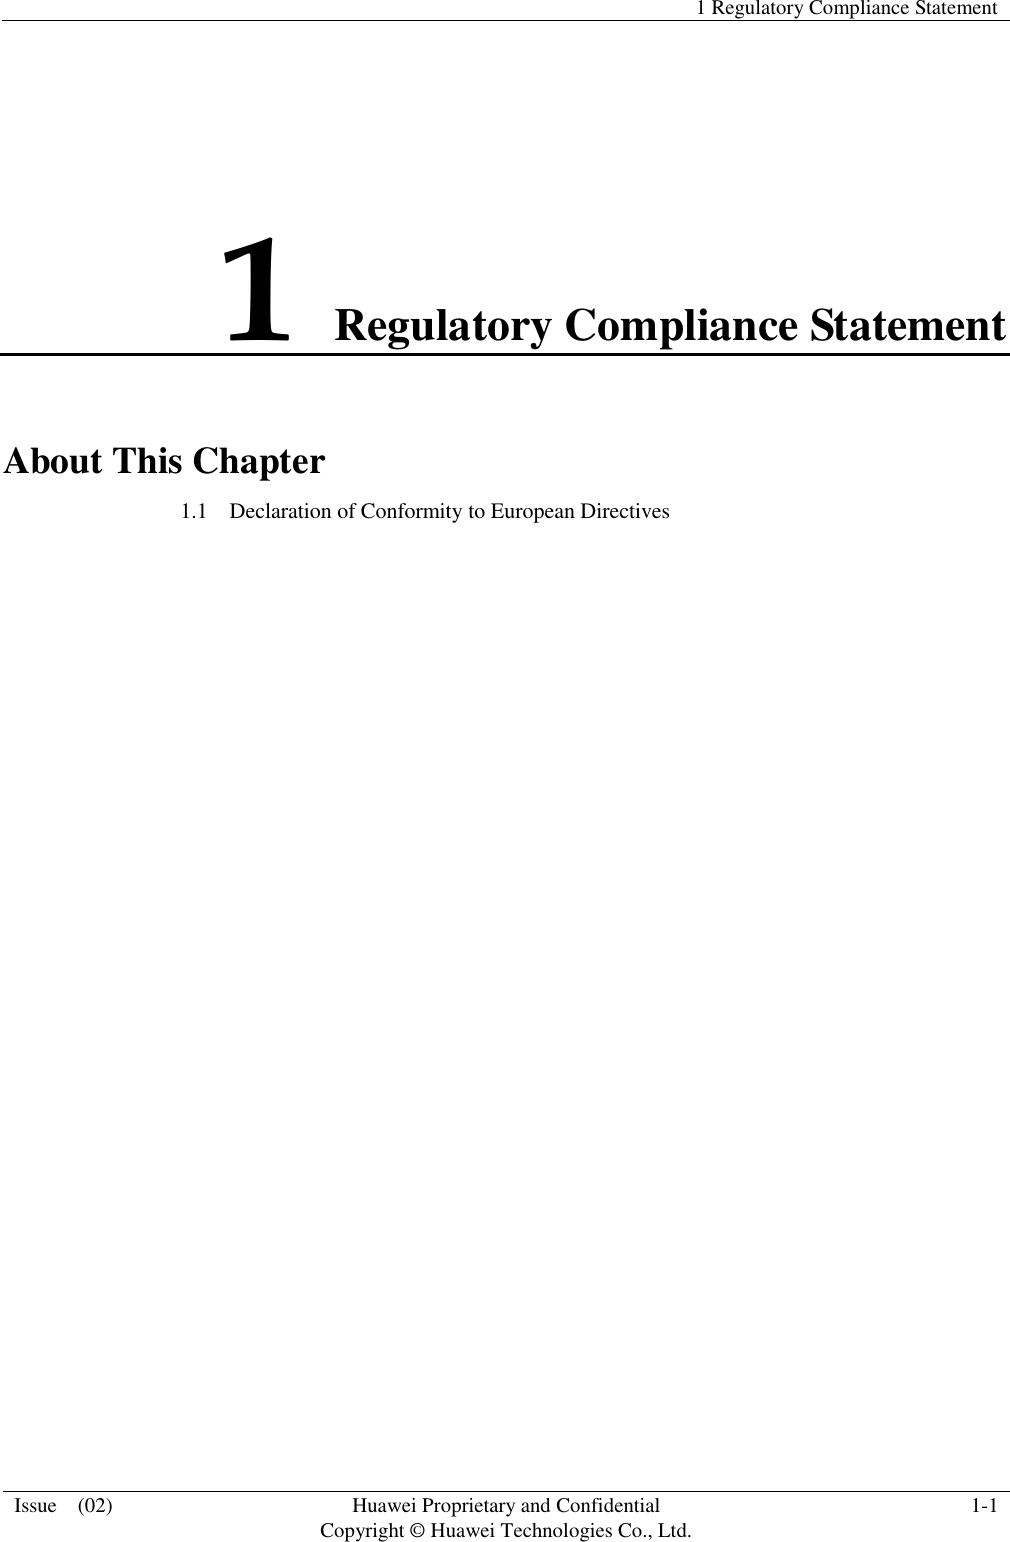   1 Regulatory Compliance Statement  Issue    (02) Huawei Proprietary and Confidential                                     Copyright © Huawei Technologies Co., Ltd. 1-1  1 Regulatory Compliance Statement About This Chapter 1.1    Declaration of Conformity to European Directives  